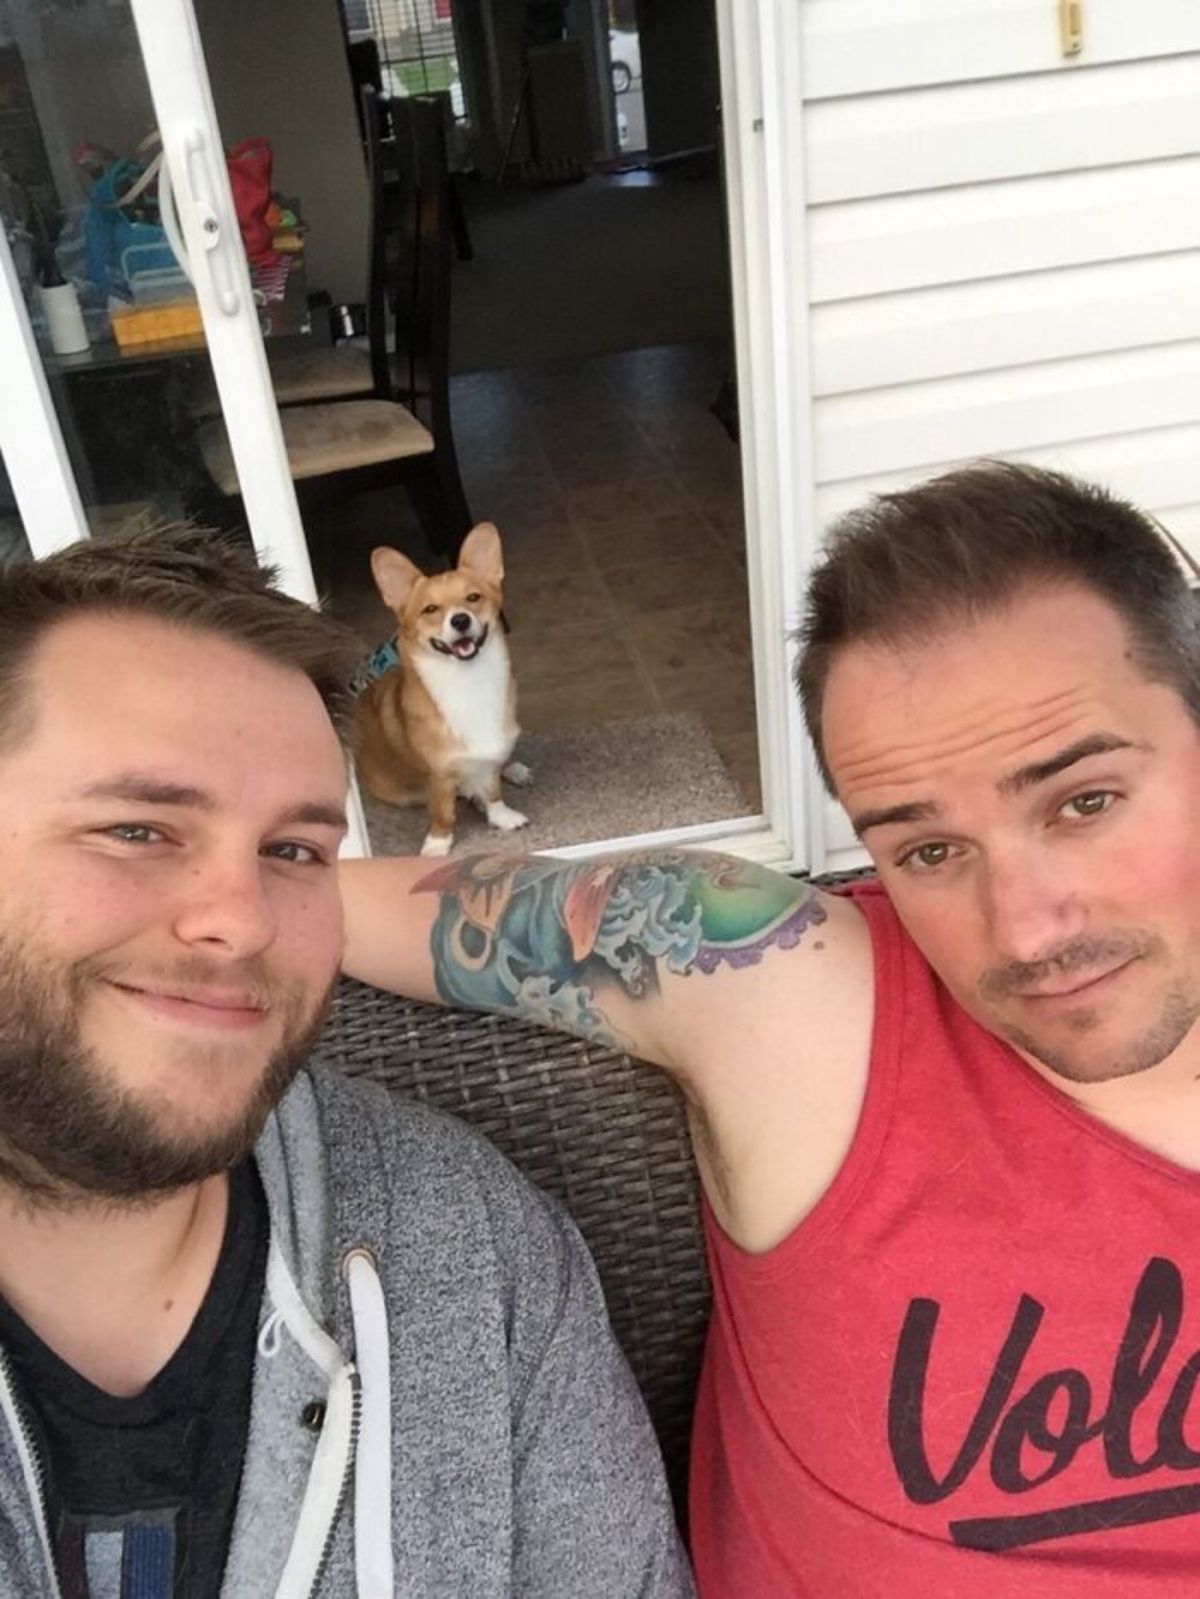 brown and white corgi sitting on the floor behind two men taking a selfie